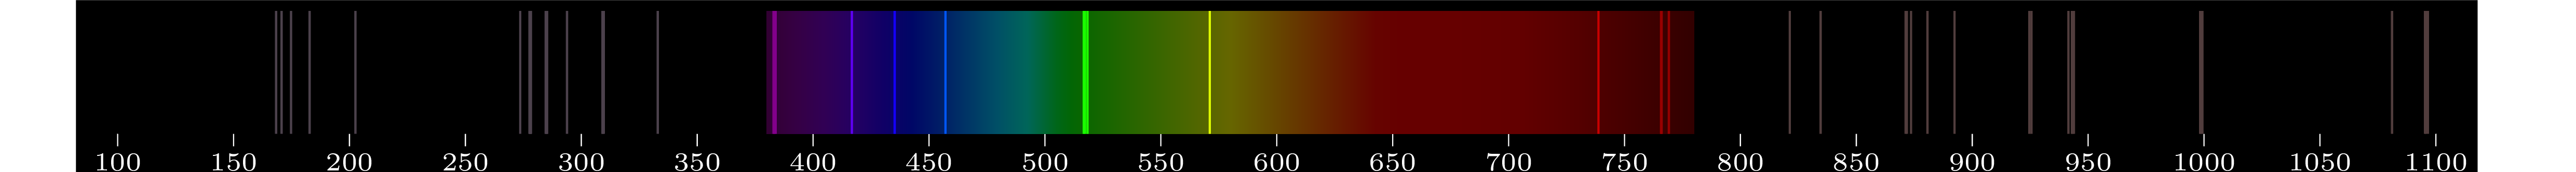 emmision spectra of element Mg